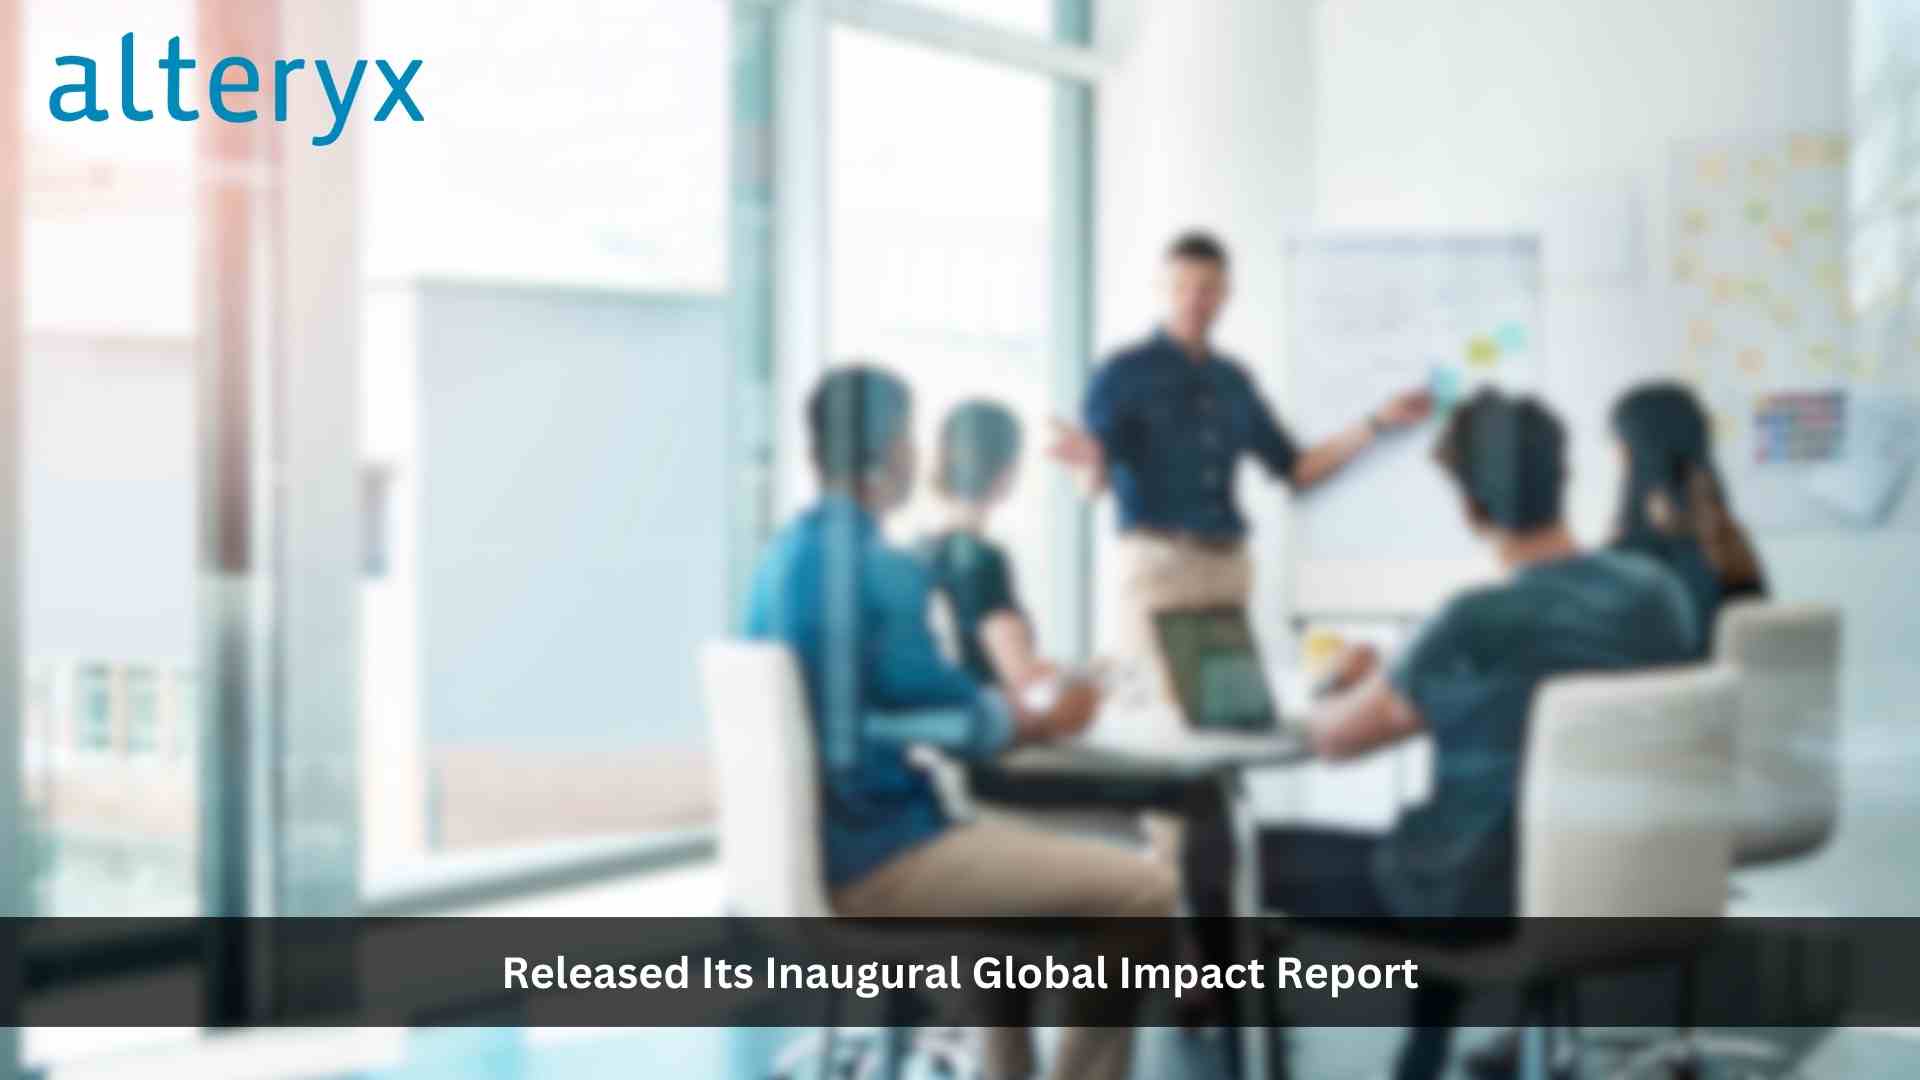 Alteryx Reinforces Commitment to Analytics for All Through ESG Priorities in Inaugural Report